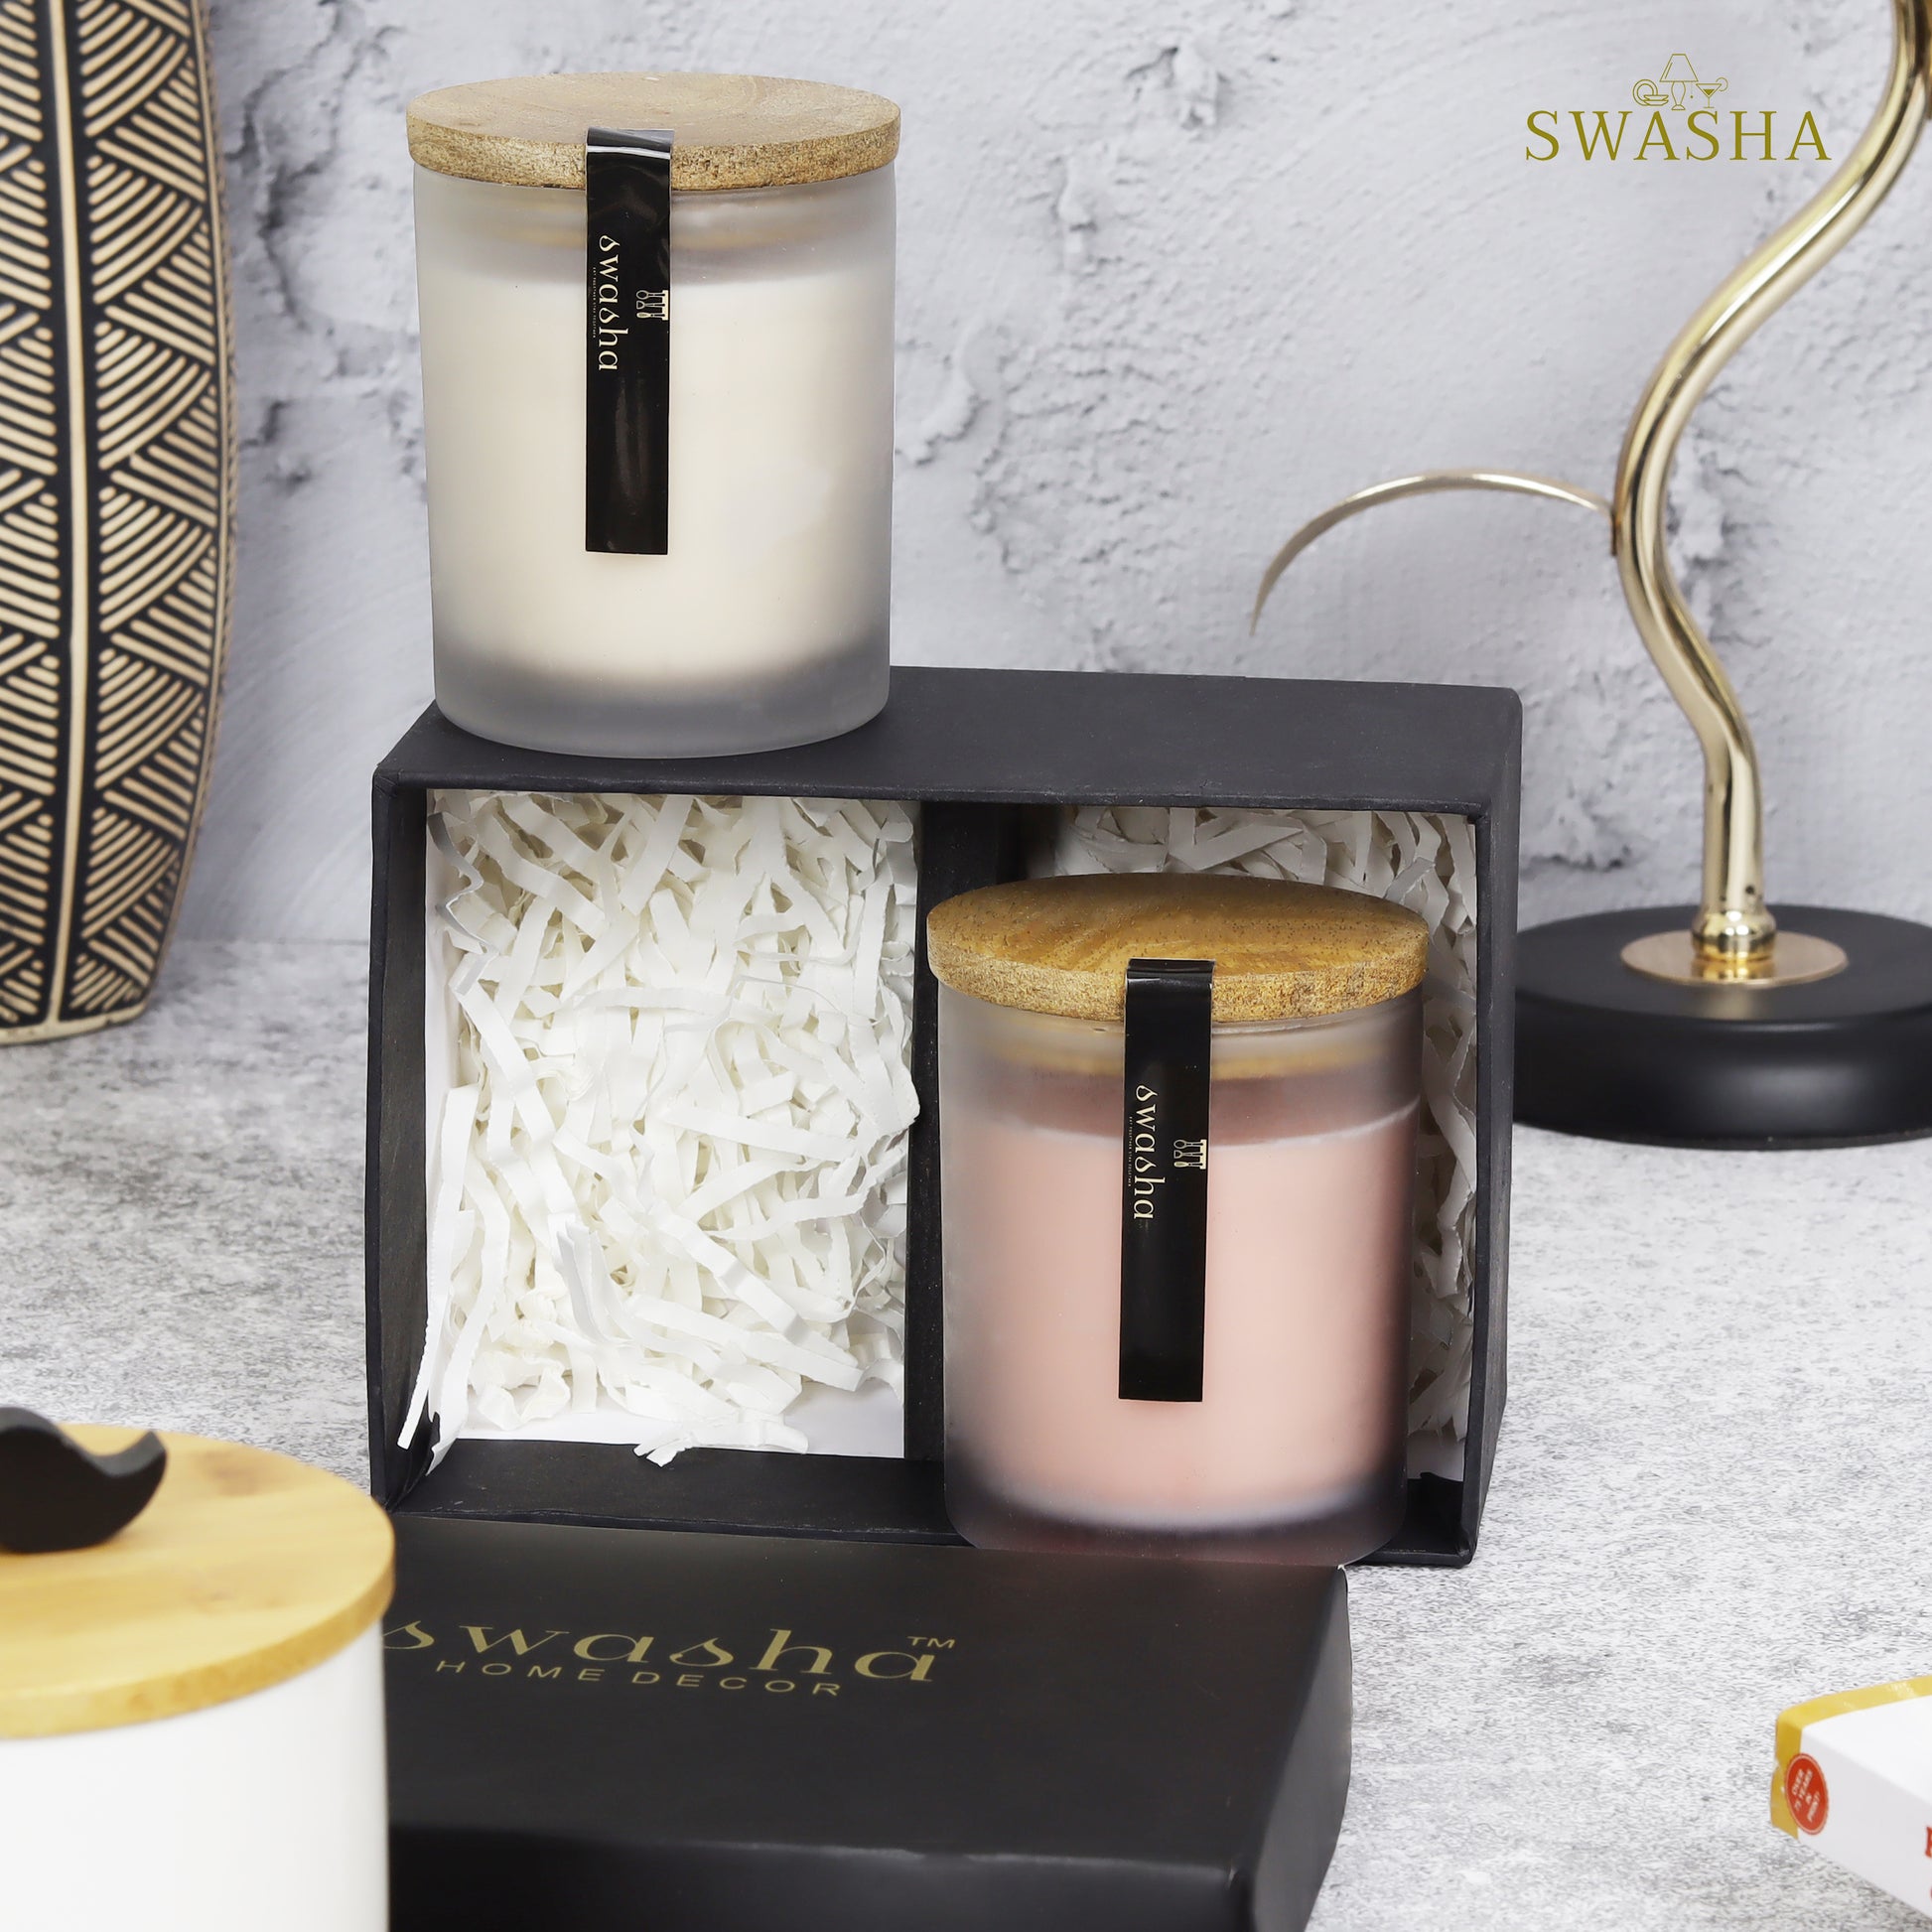 Vanilla scented candles in glass jars - perfect for cozy evenings and relaxation